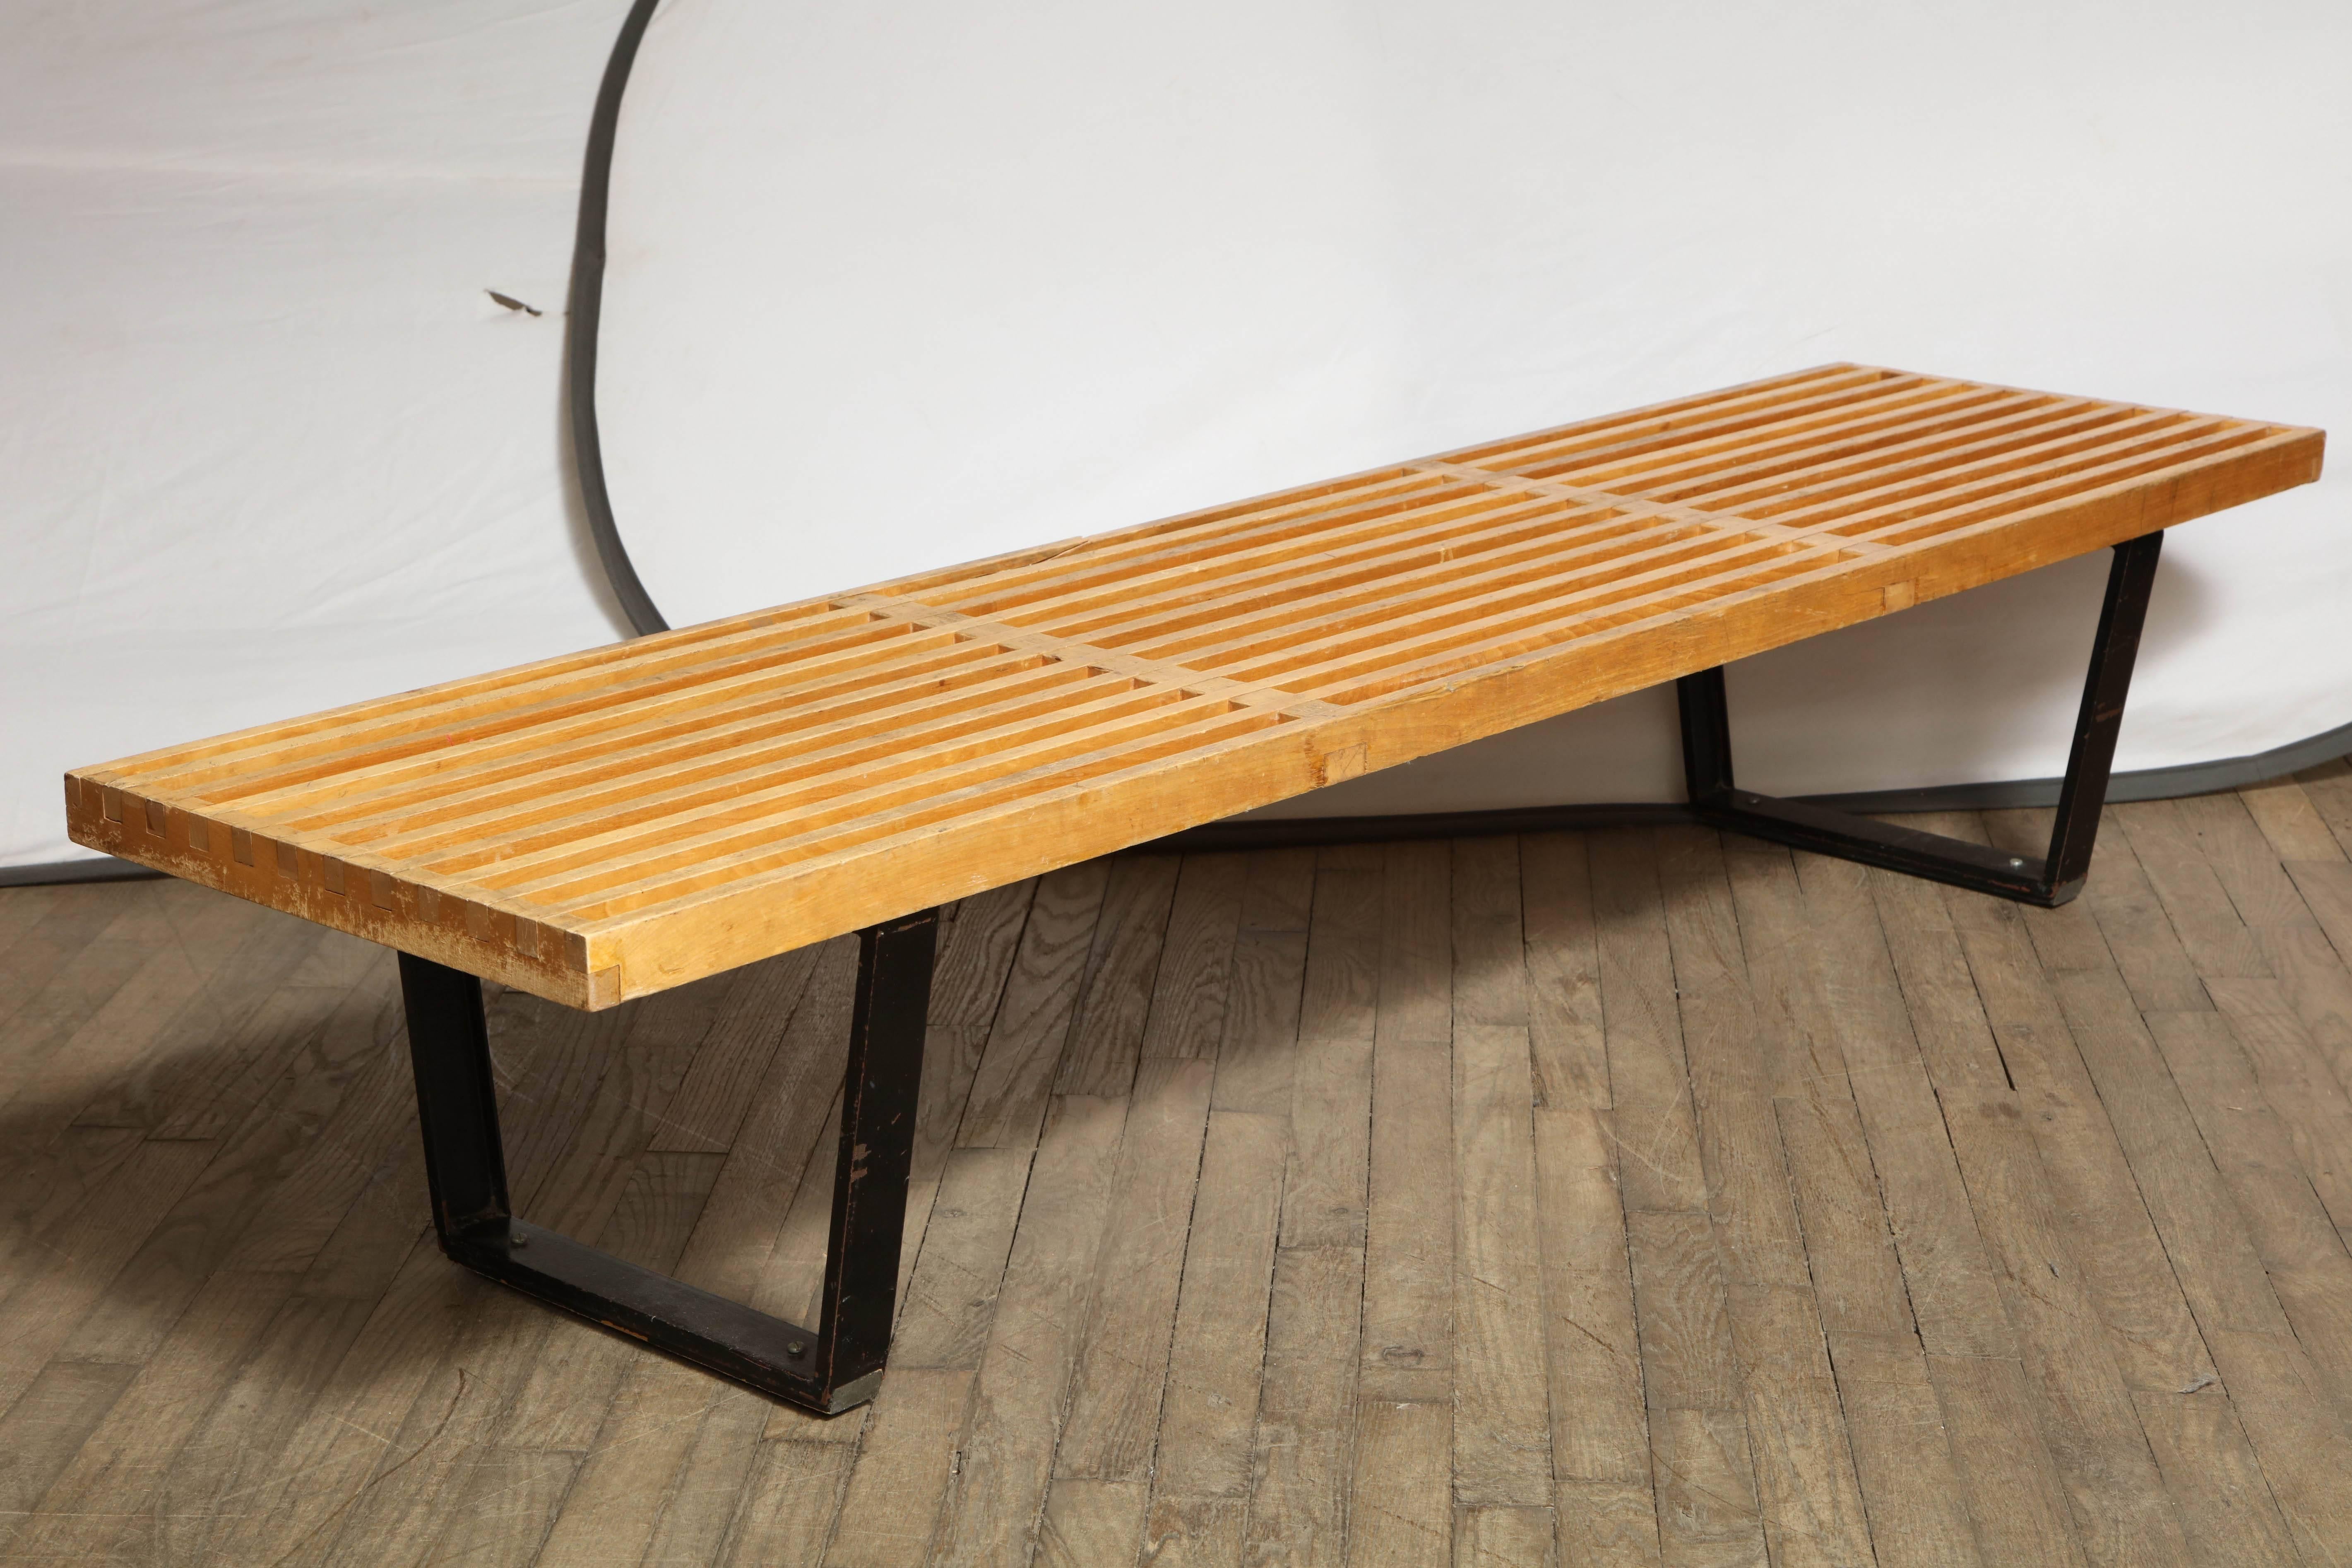 Handpicked by buyers at Ann-Morris Inc.

We also have a 2nd George Nelson Bench from the 1960s 